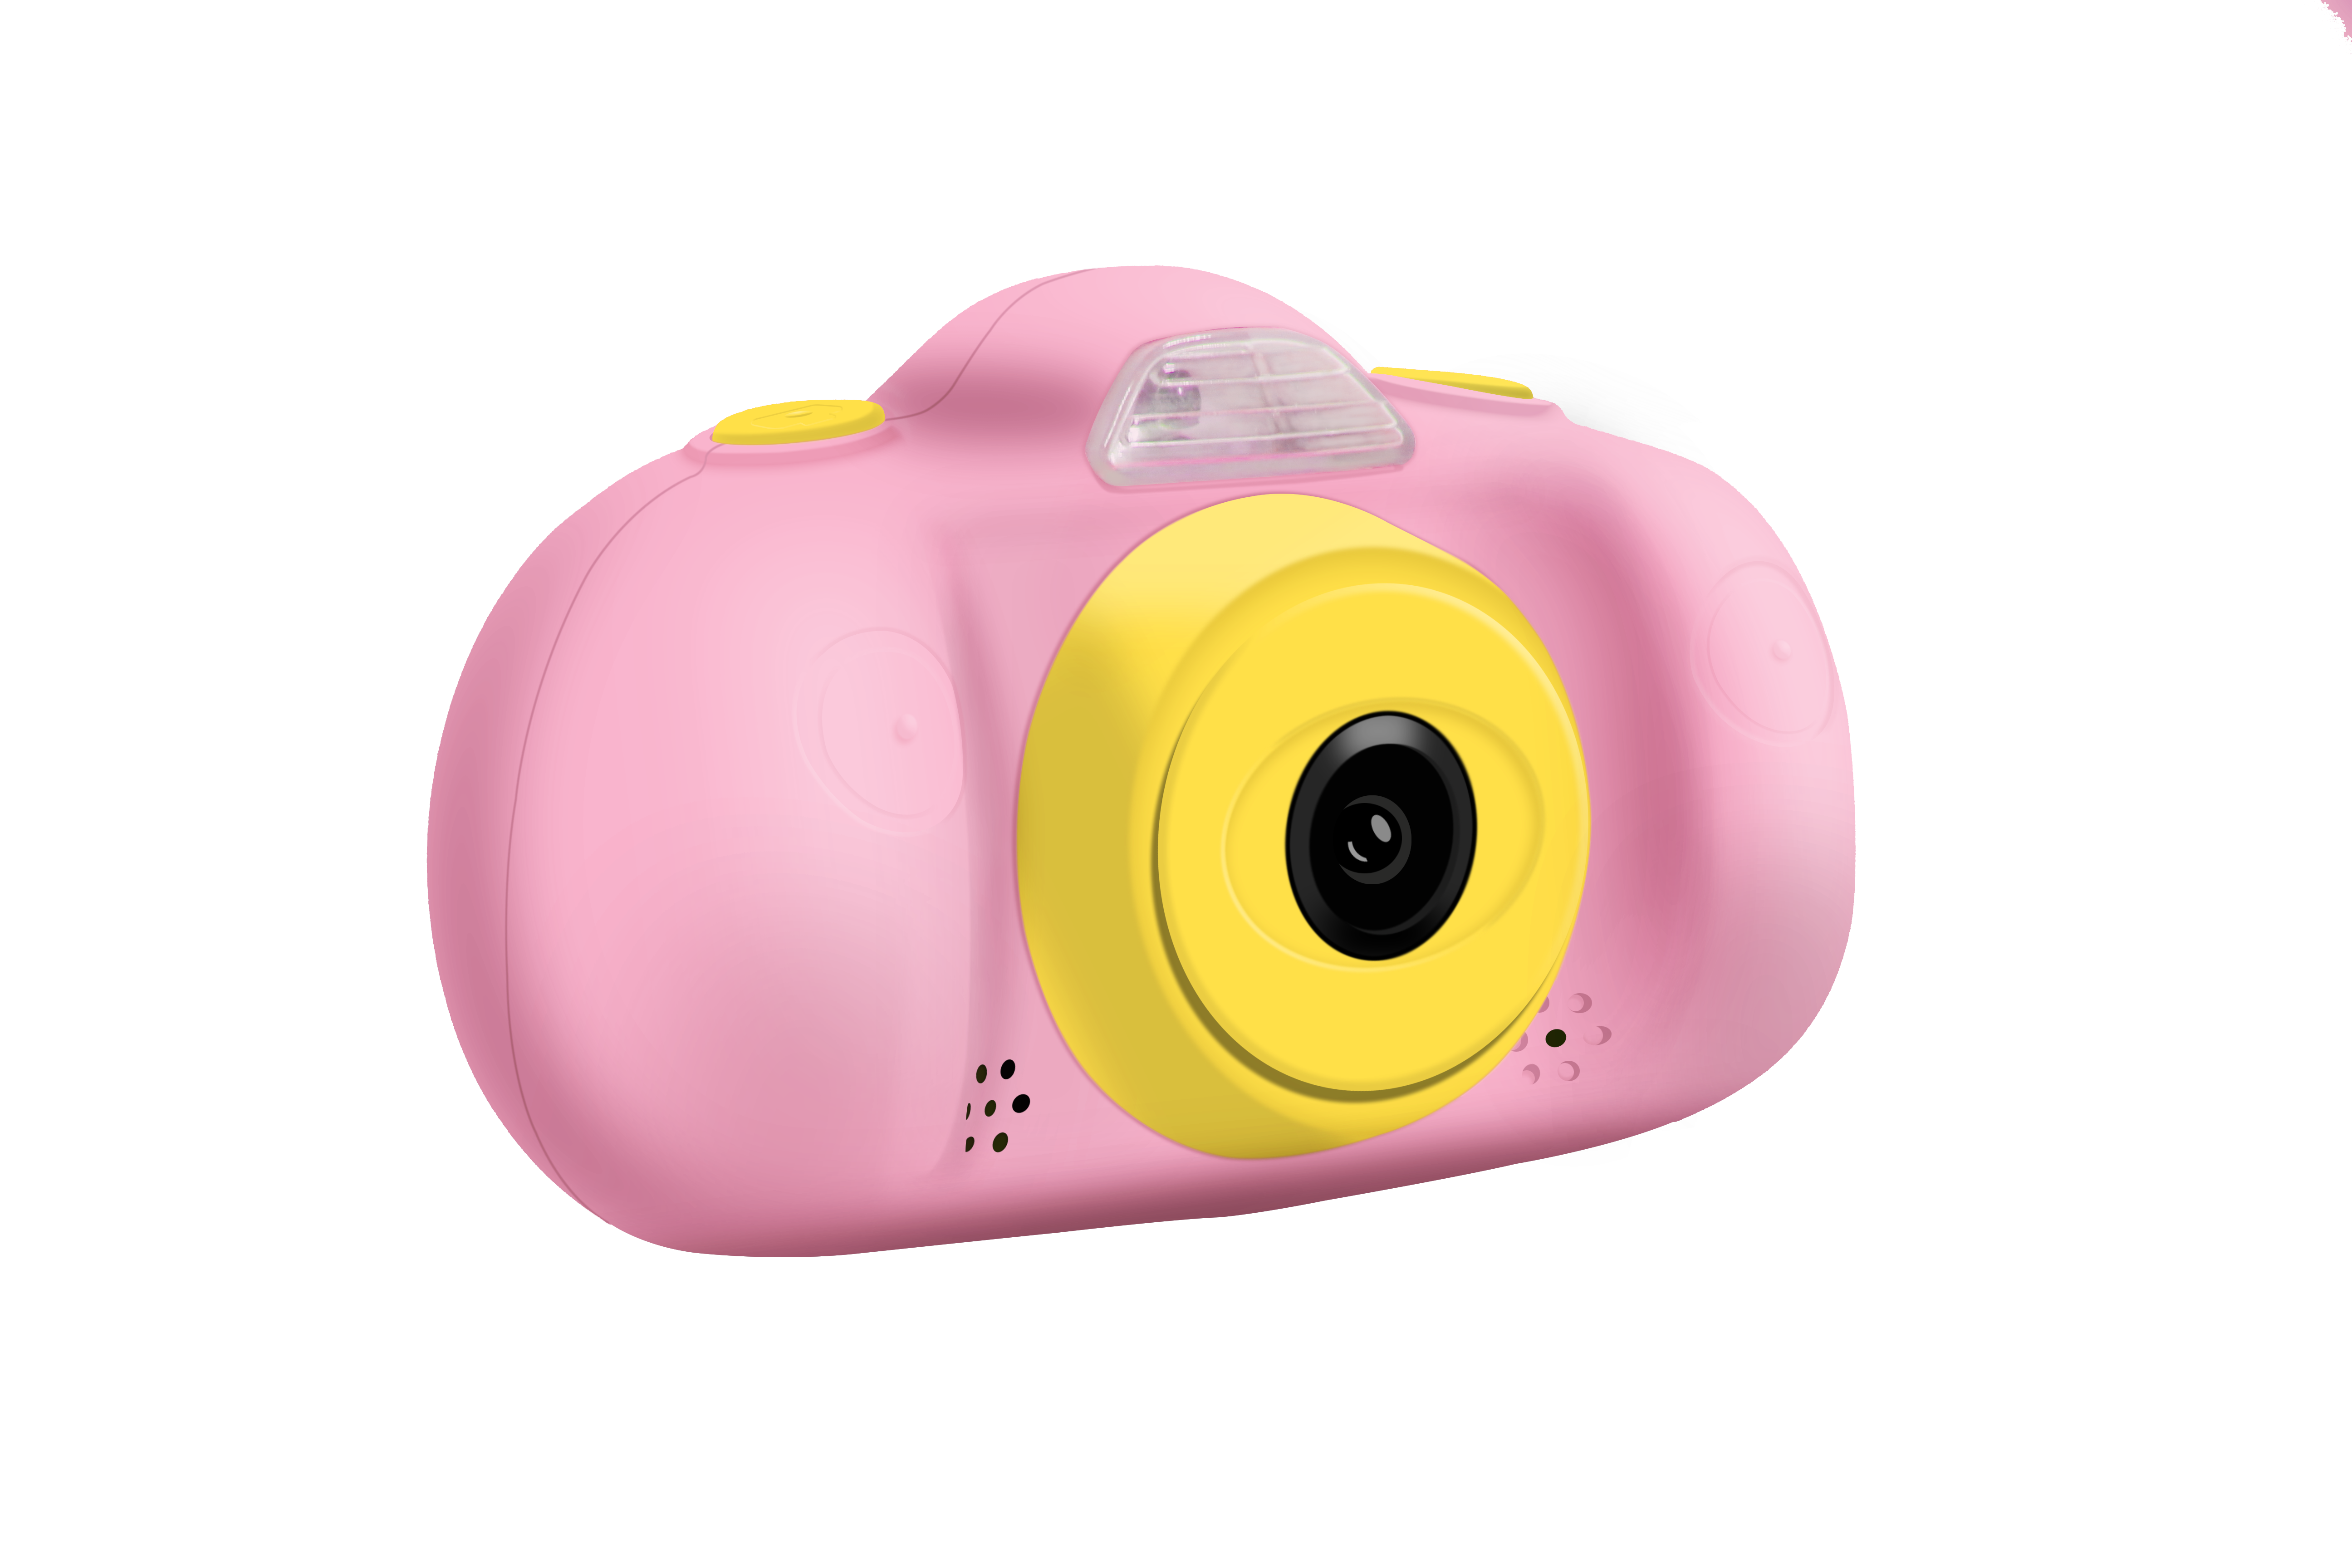 Find Children Digital Camera 2 4inch 8MP HD Camcorder Action Camera For Outdoor Travel for Sale on Gipsybee.com with cryptocurrencies